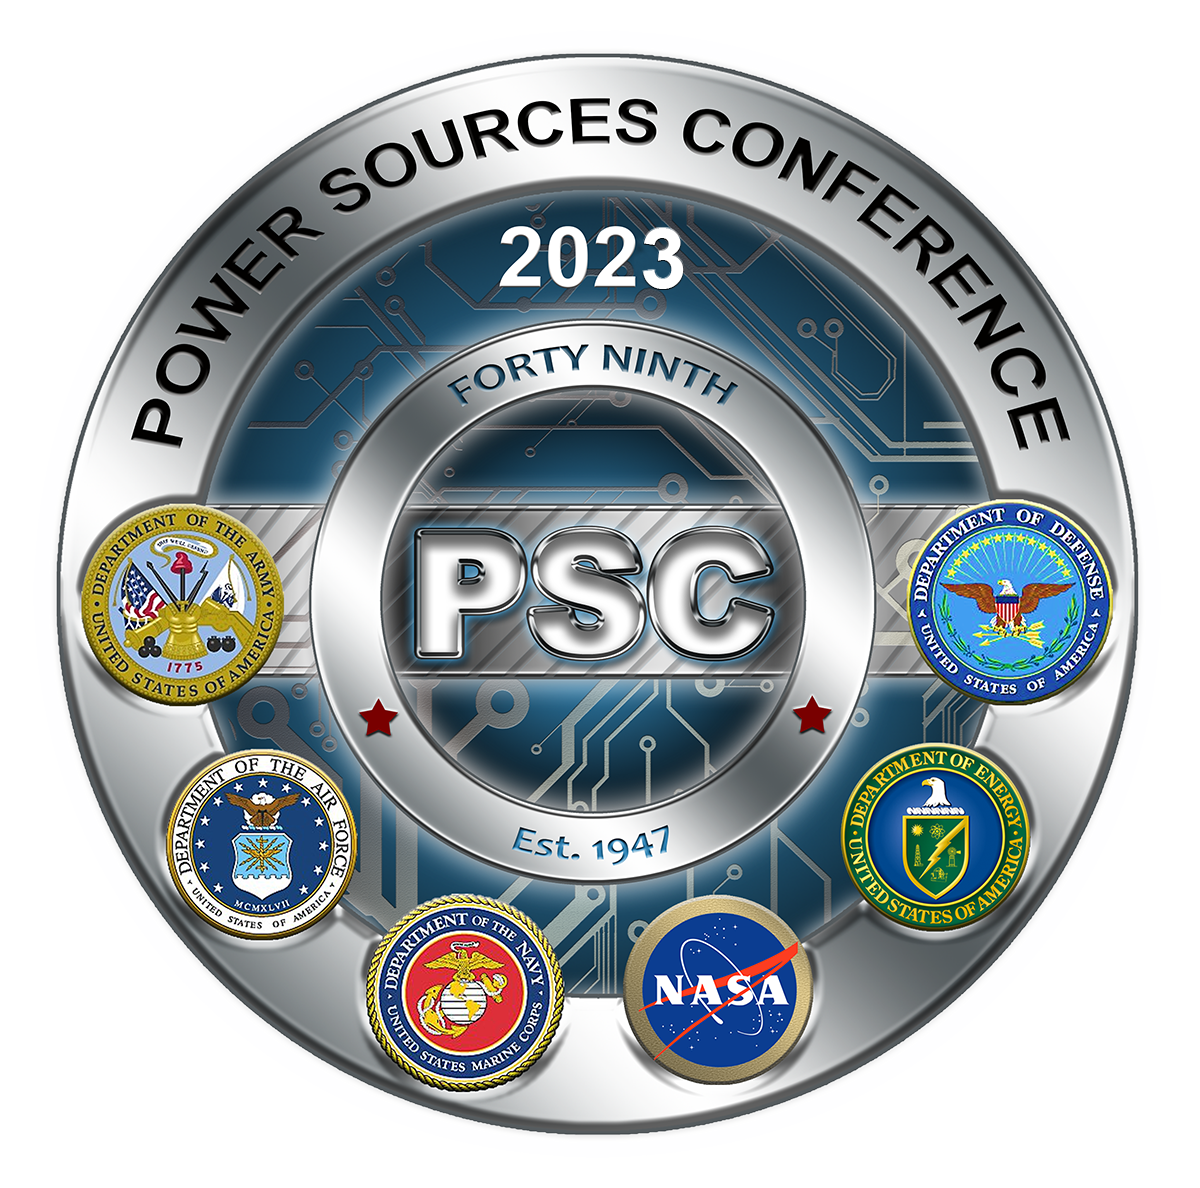 49TH POWER SOURCES CONFERENCE